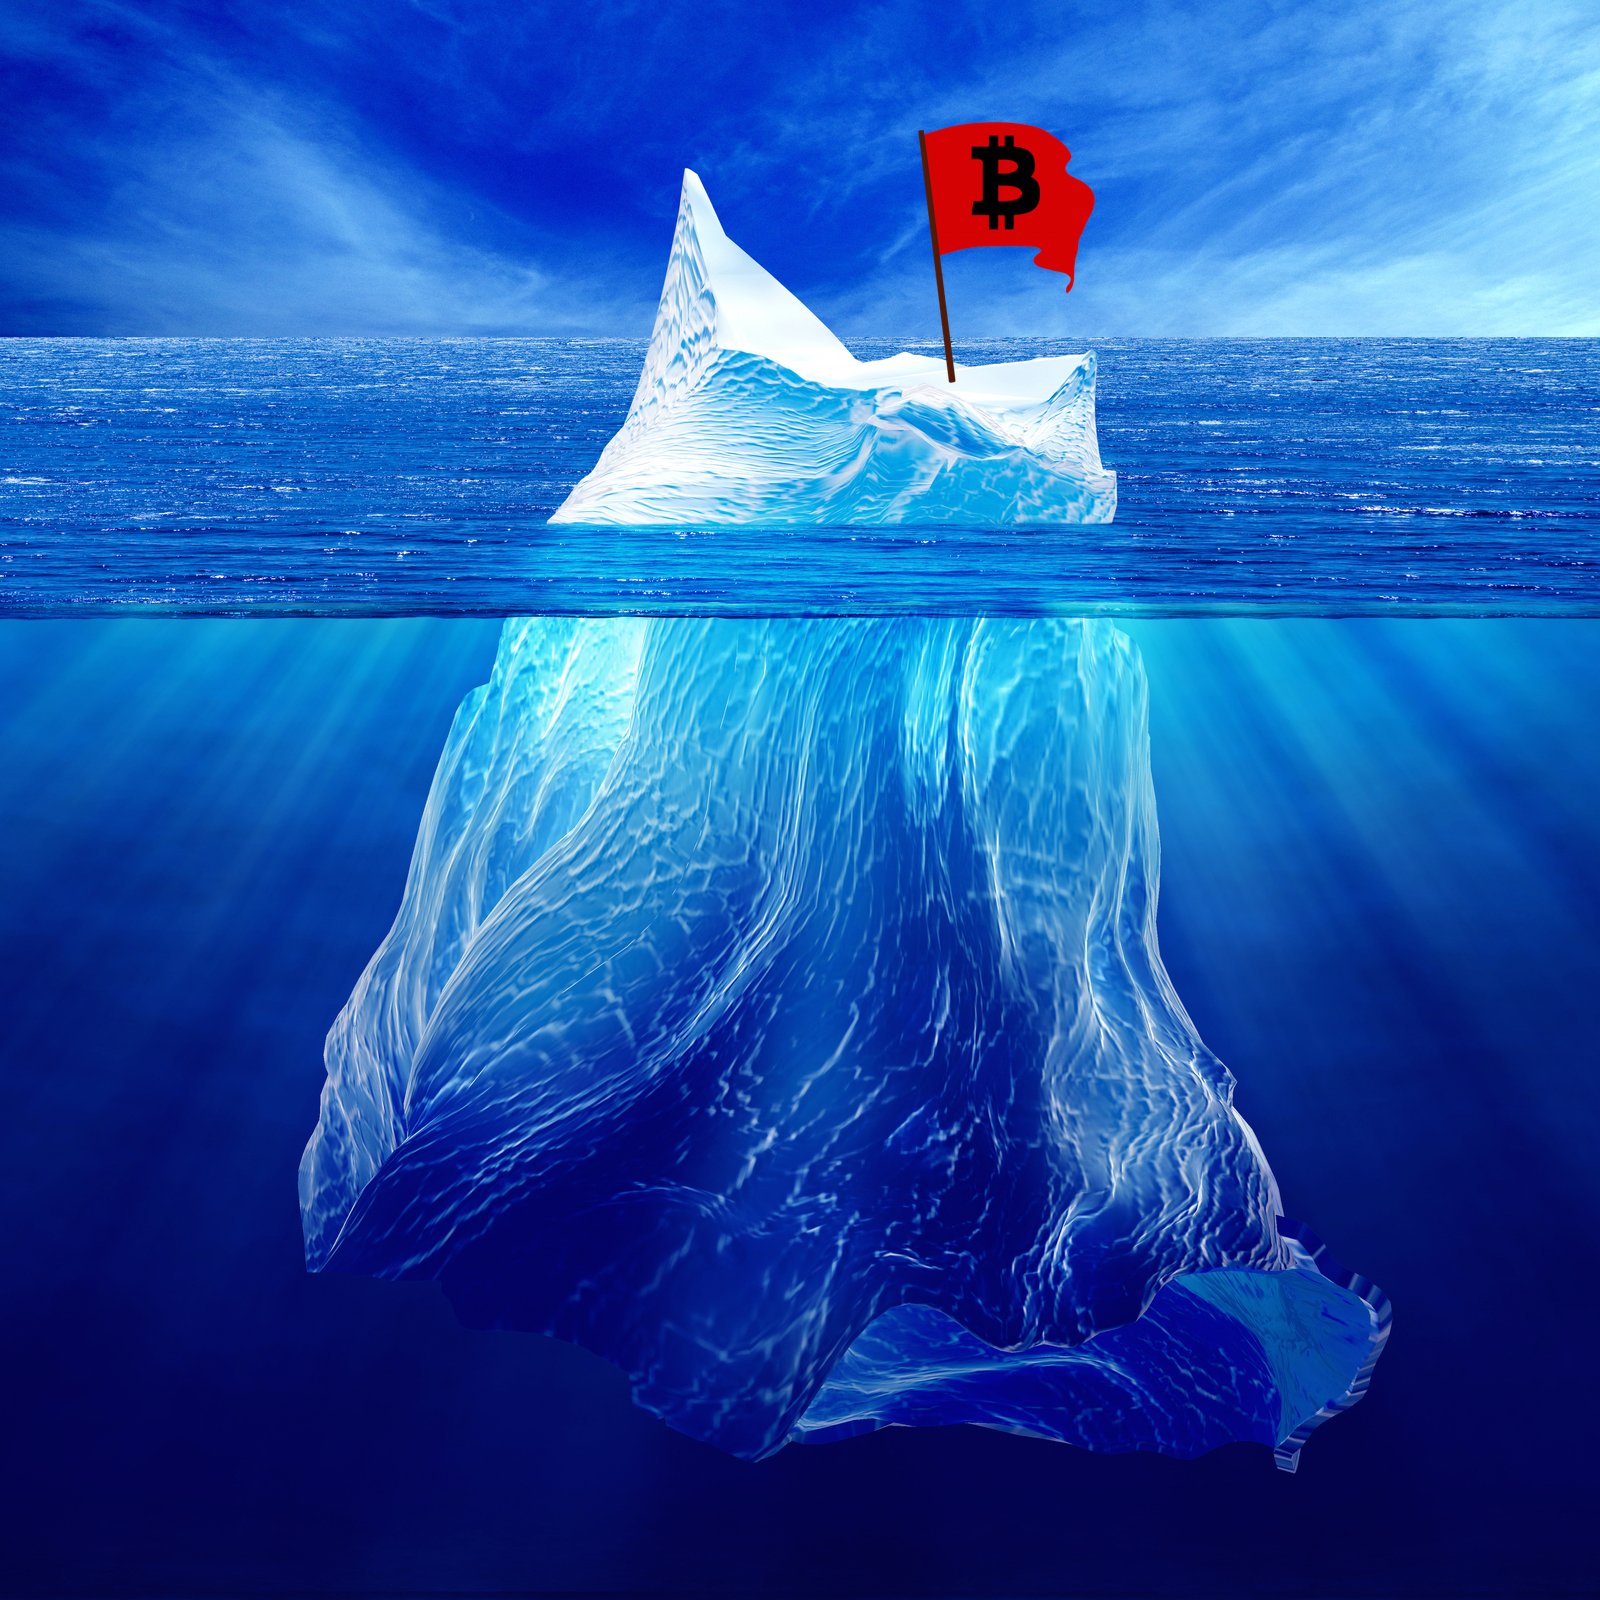 Meme Chart Mania: Is This the Tip of the Iceberg or Have We Already Hit Peak Bitcoin?